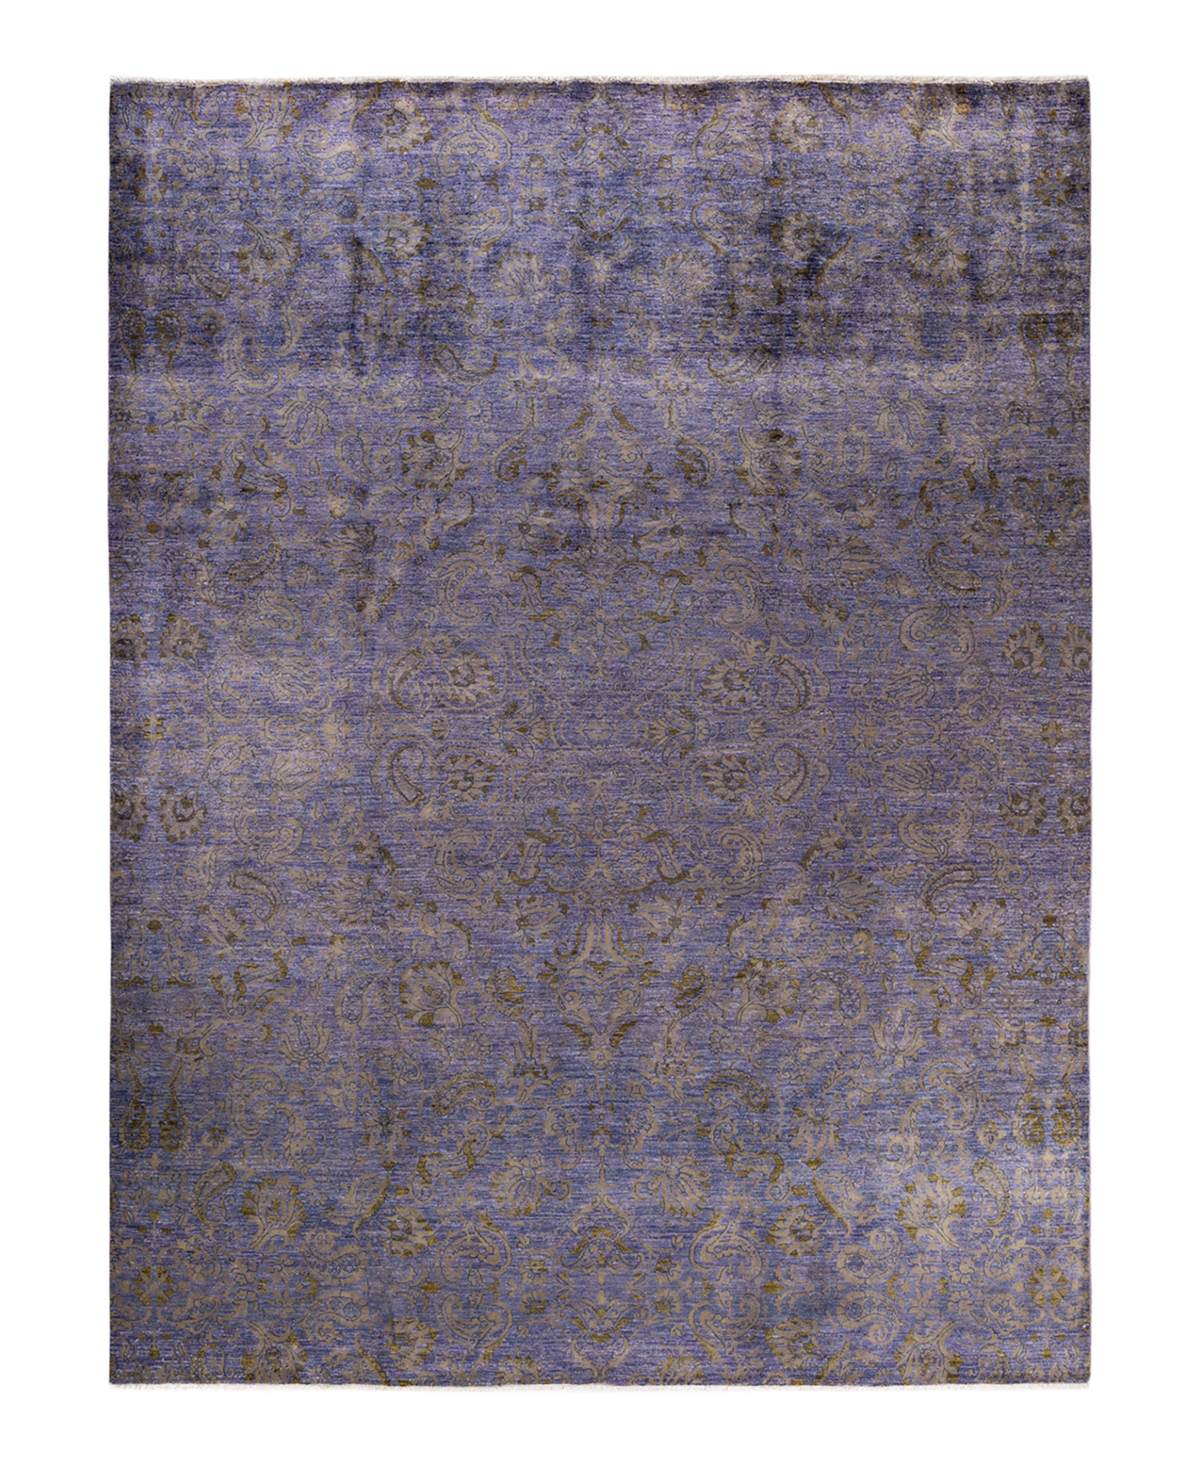 Adorn Hand Woven Rugs Suzani M1771 9'1in x 11'8in Area Rug - Purple